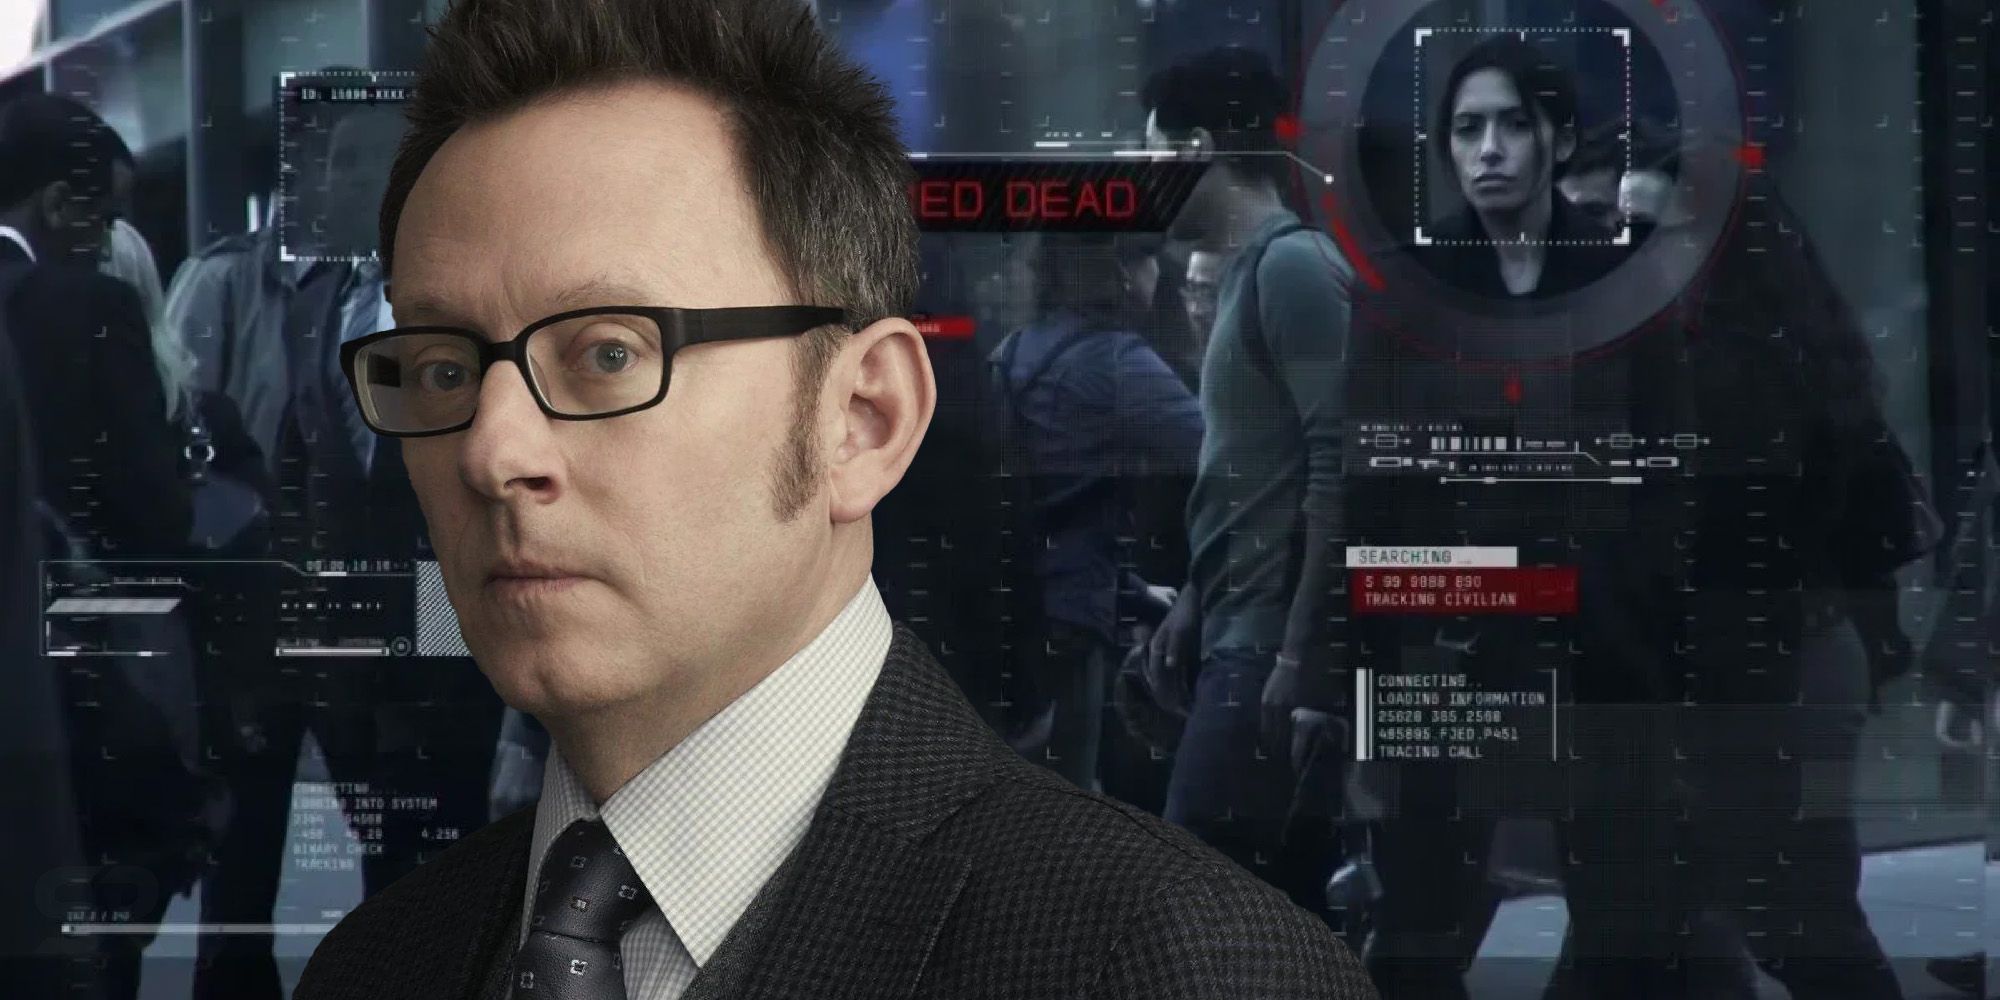 Person of Interest Finch the machine